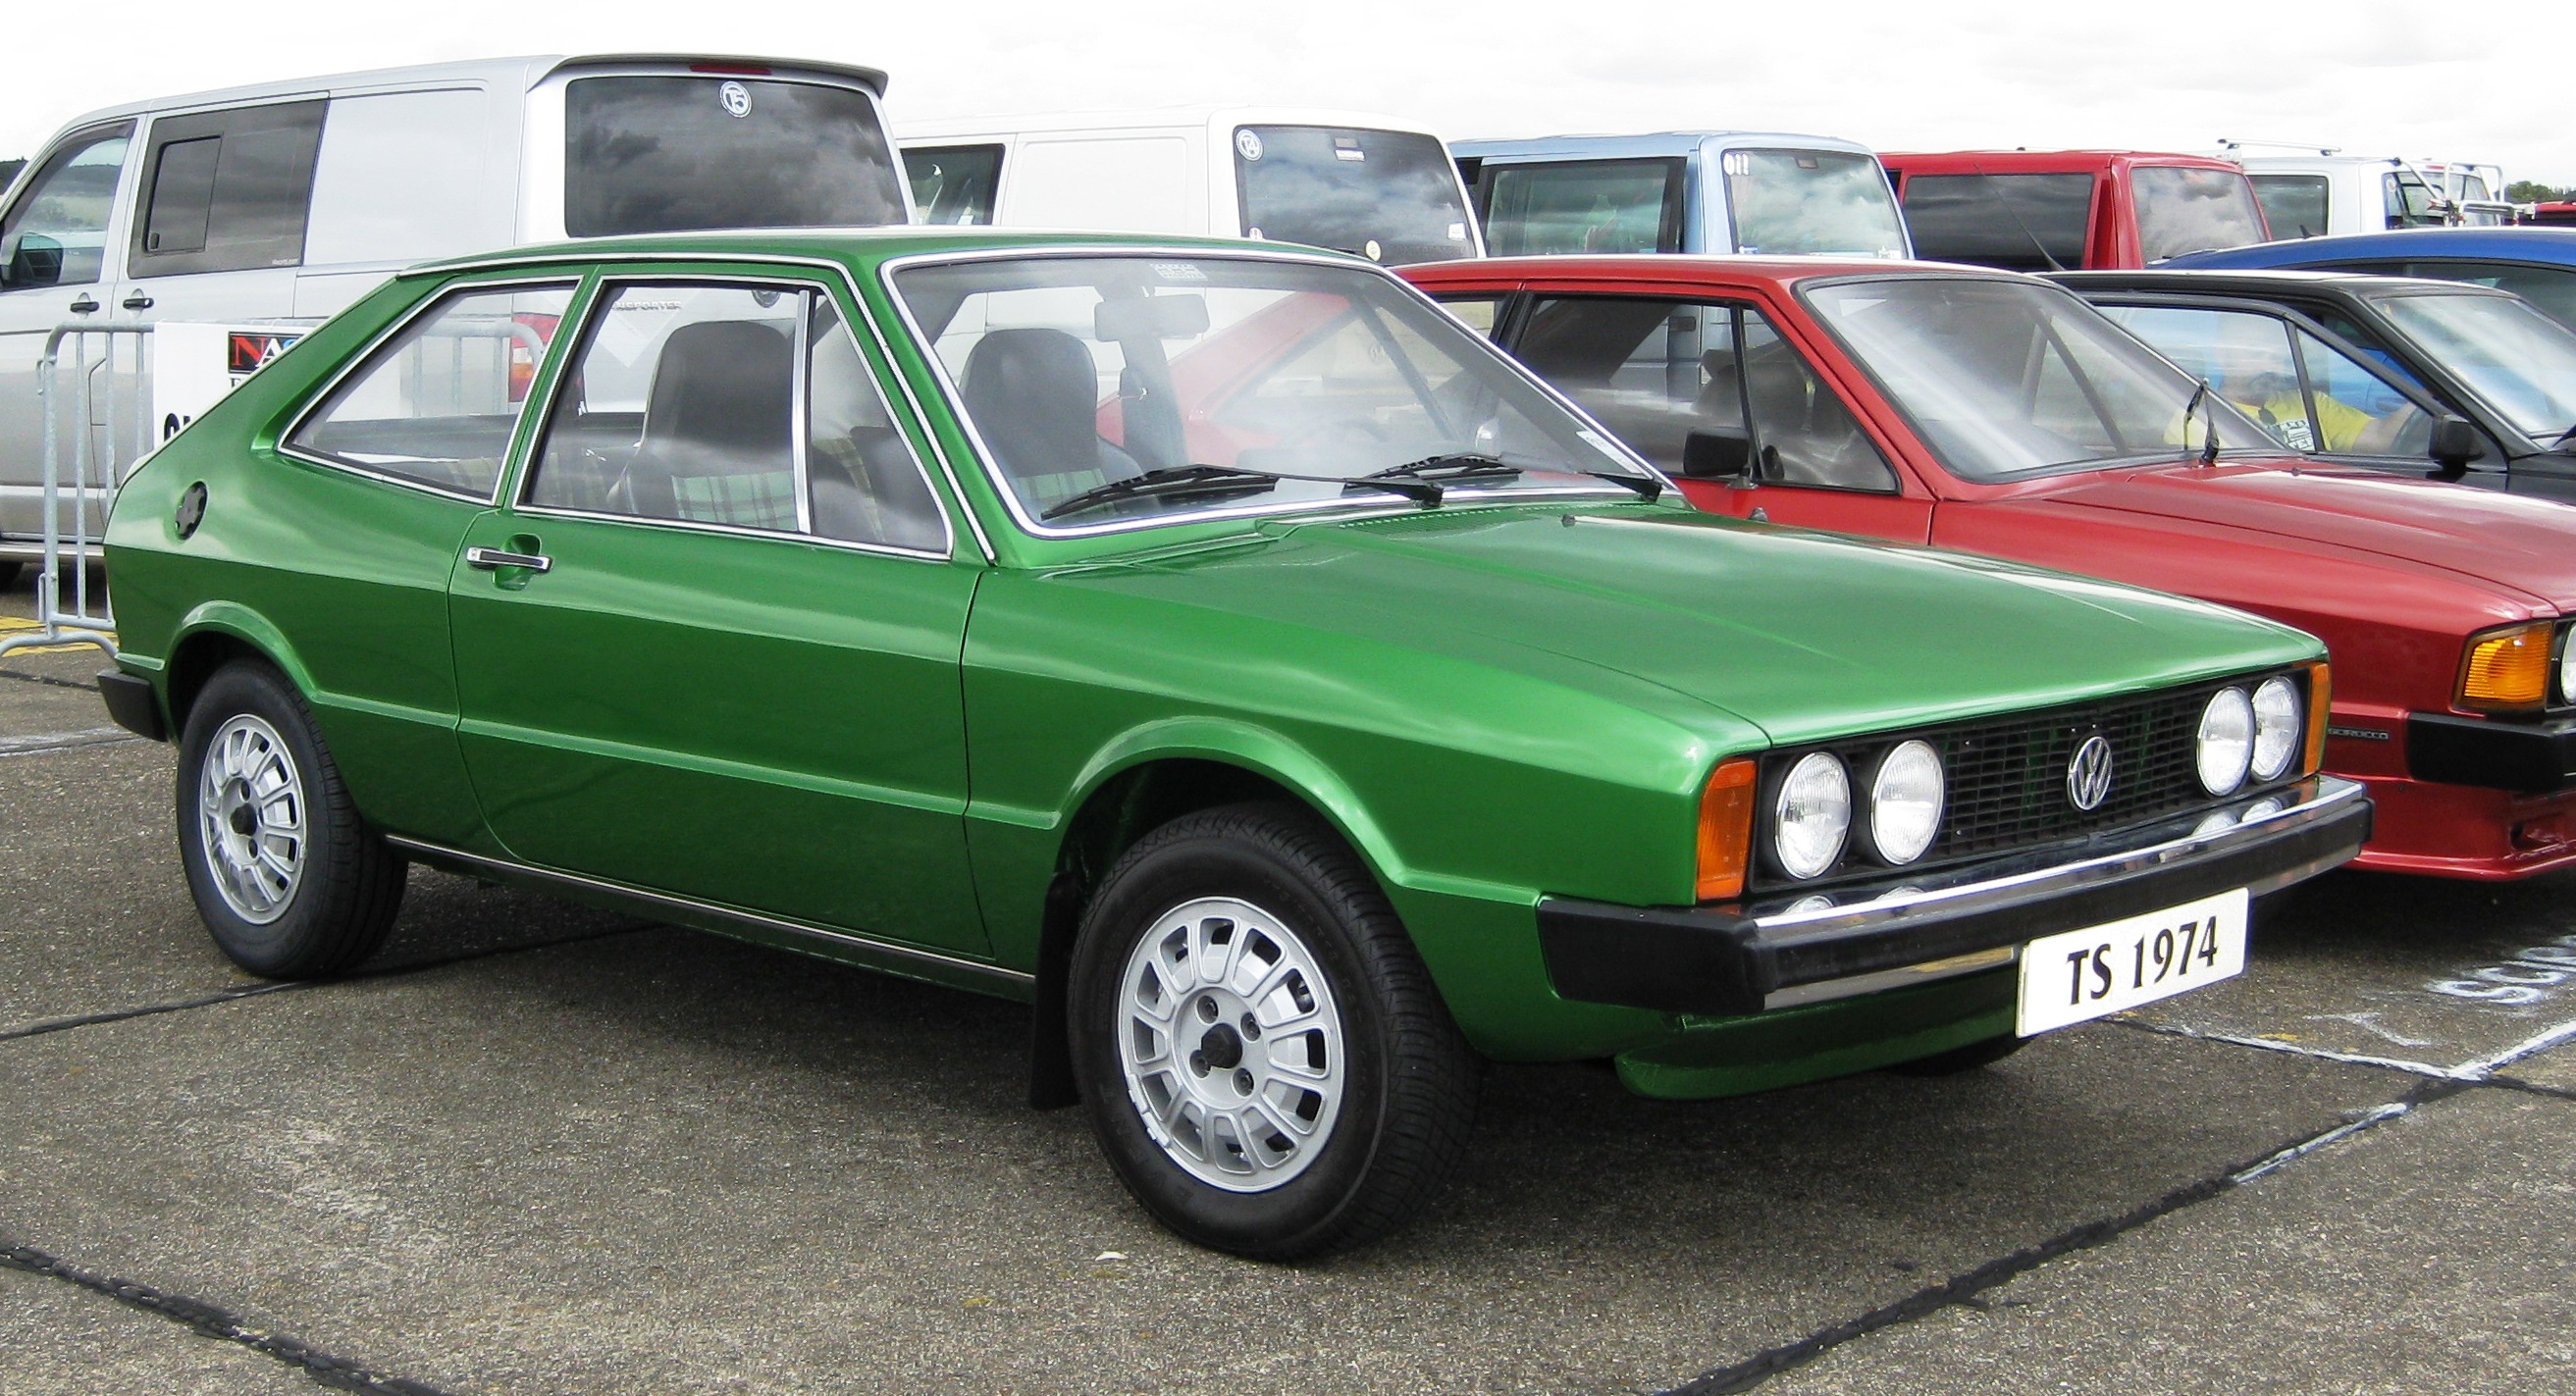 Volkswagen_Scirocco_Mk1_1974_one_of_the_very_early_ones_at_North_Weald_in_2010.jpg